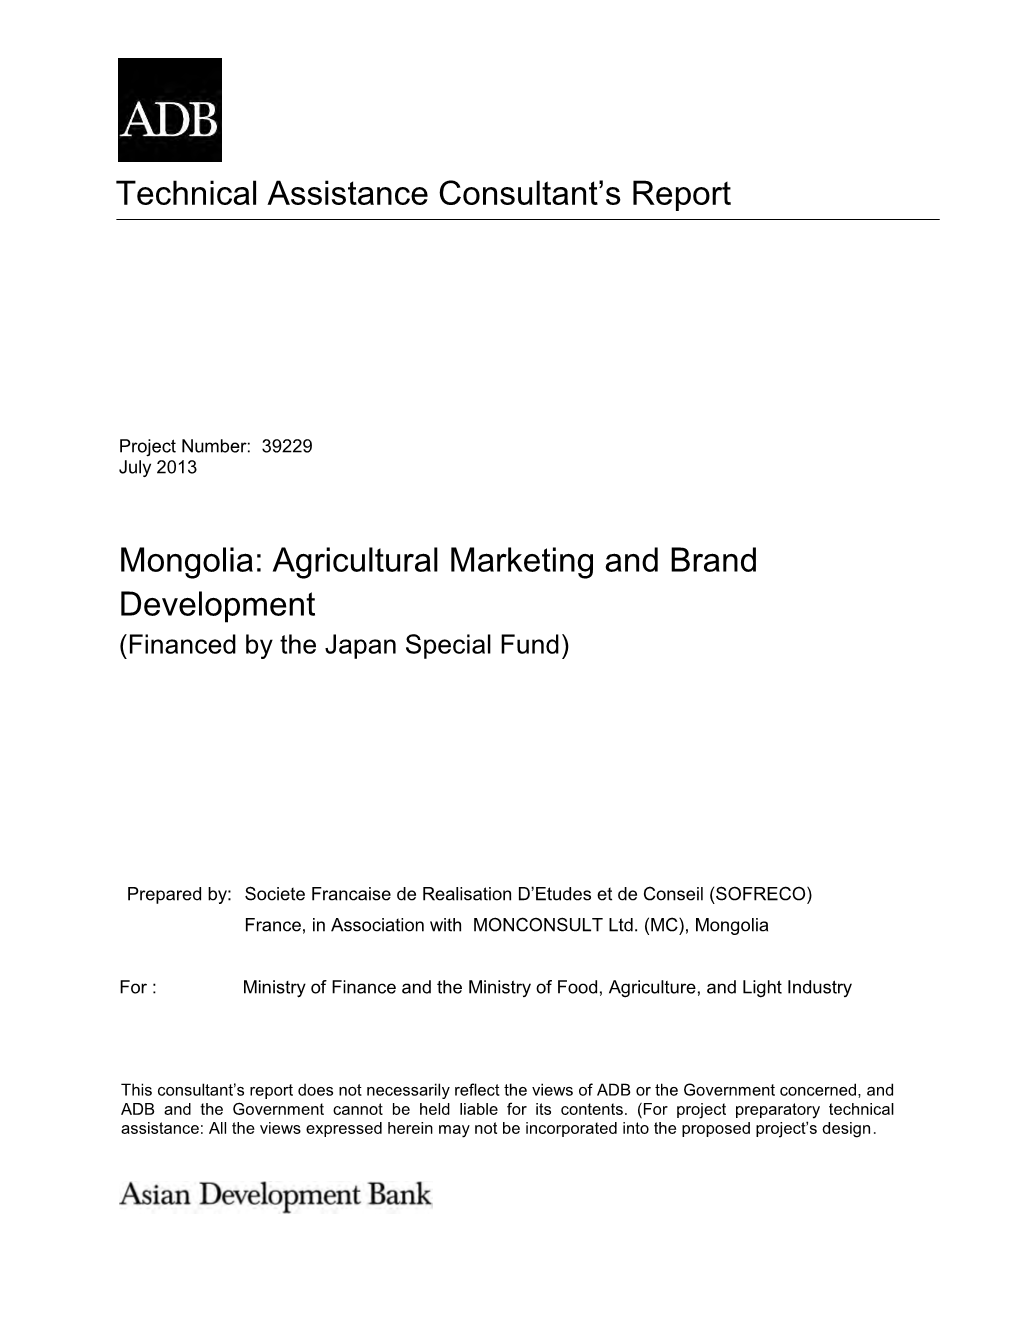 Technical Assistance Consultant's Report Mongolia: Agricultural